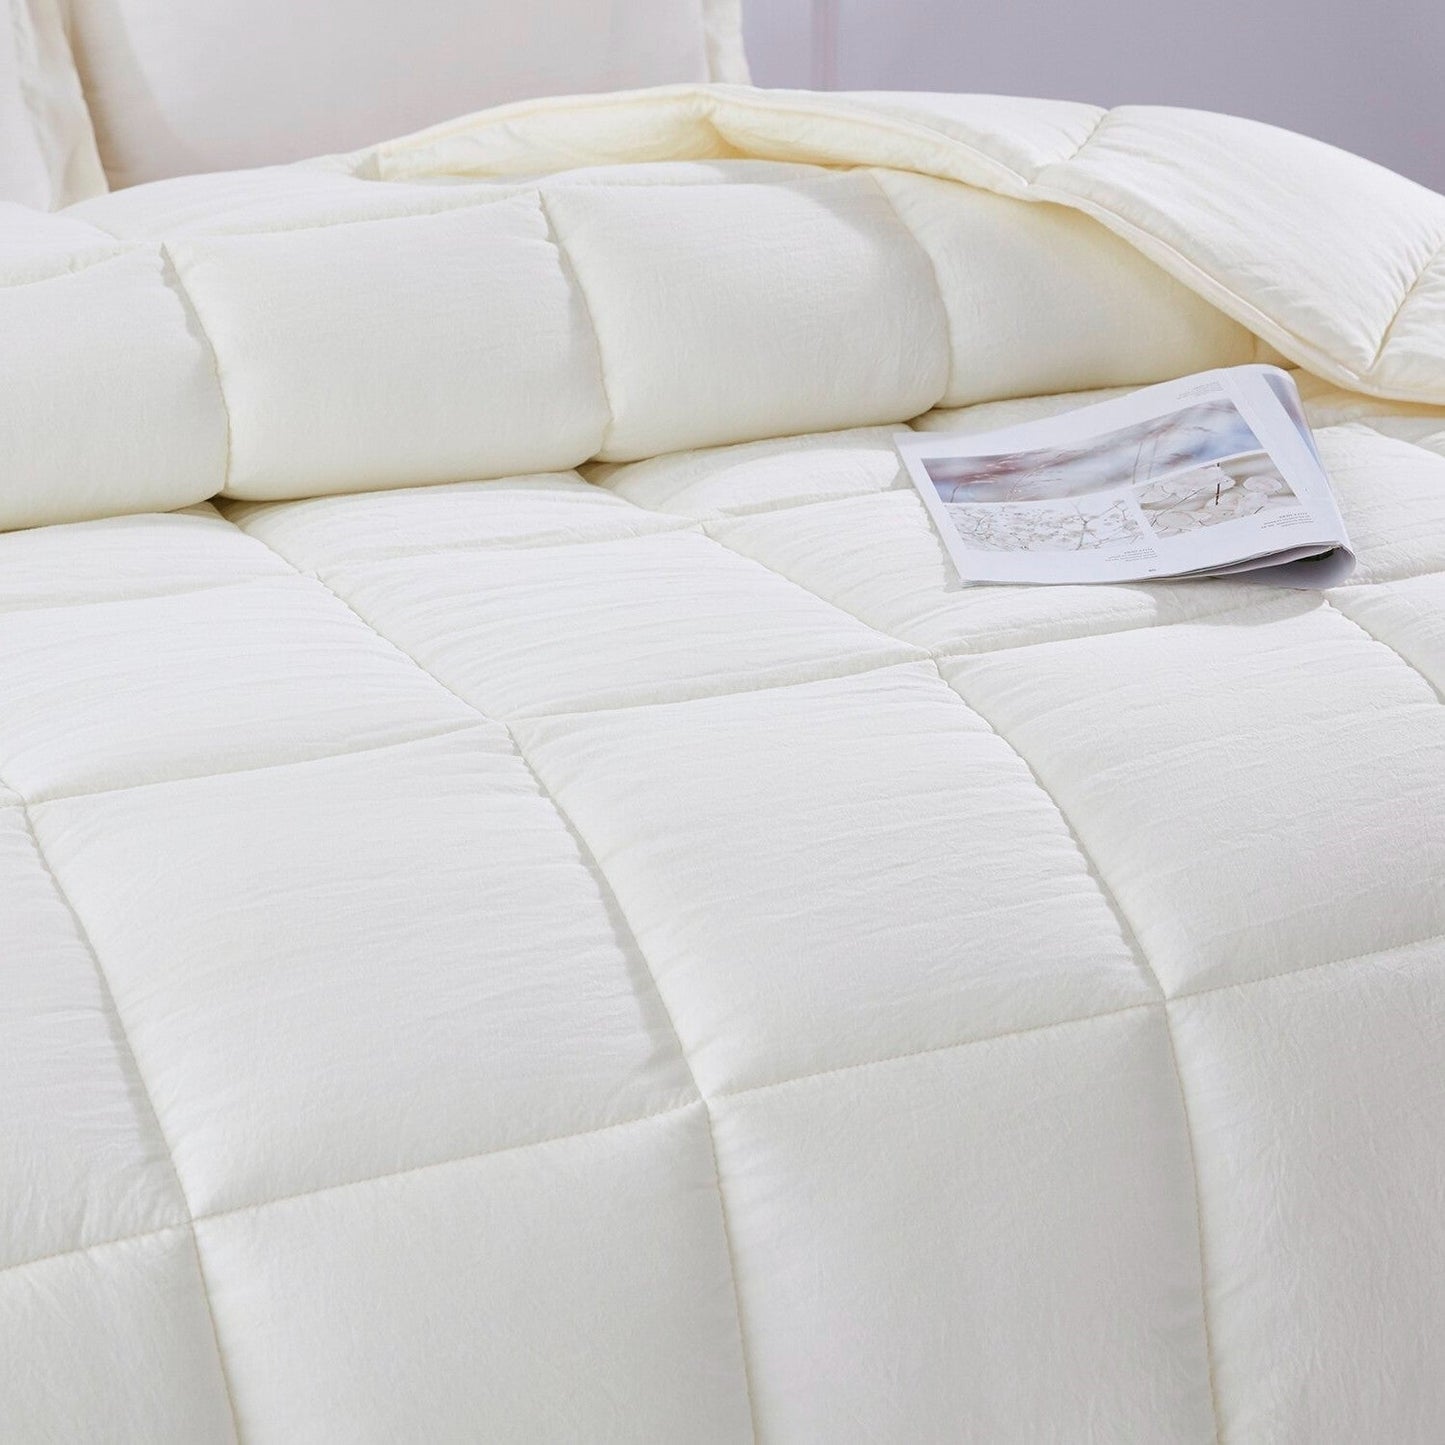 Bedroom > Comforters And Sets - King Size Off White 3 Piece Microfiber Reversible Comforter Set